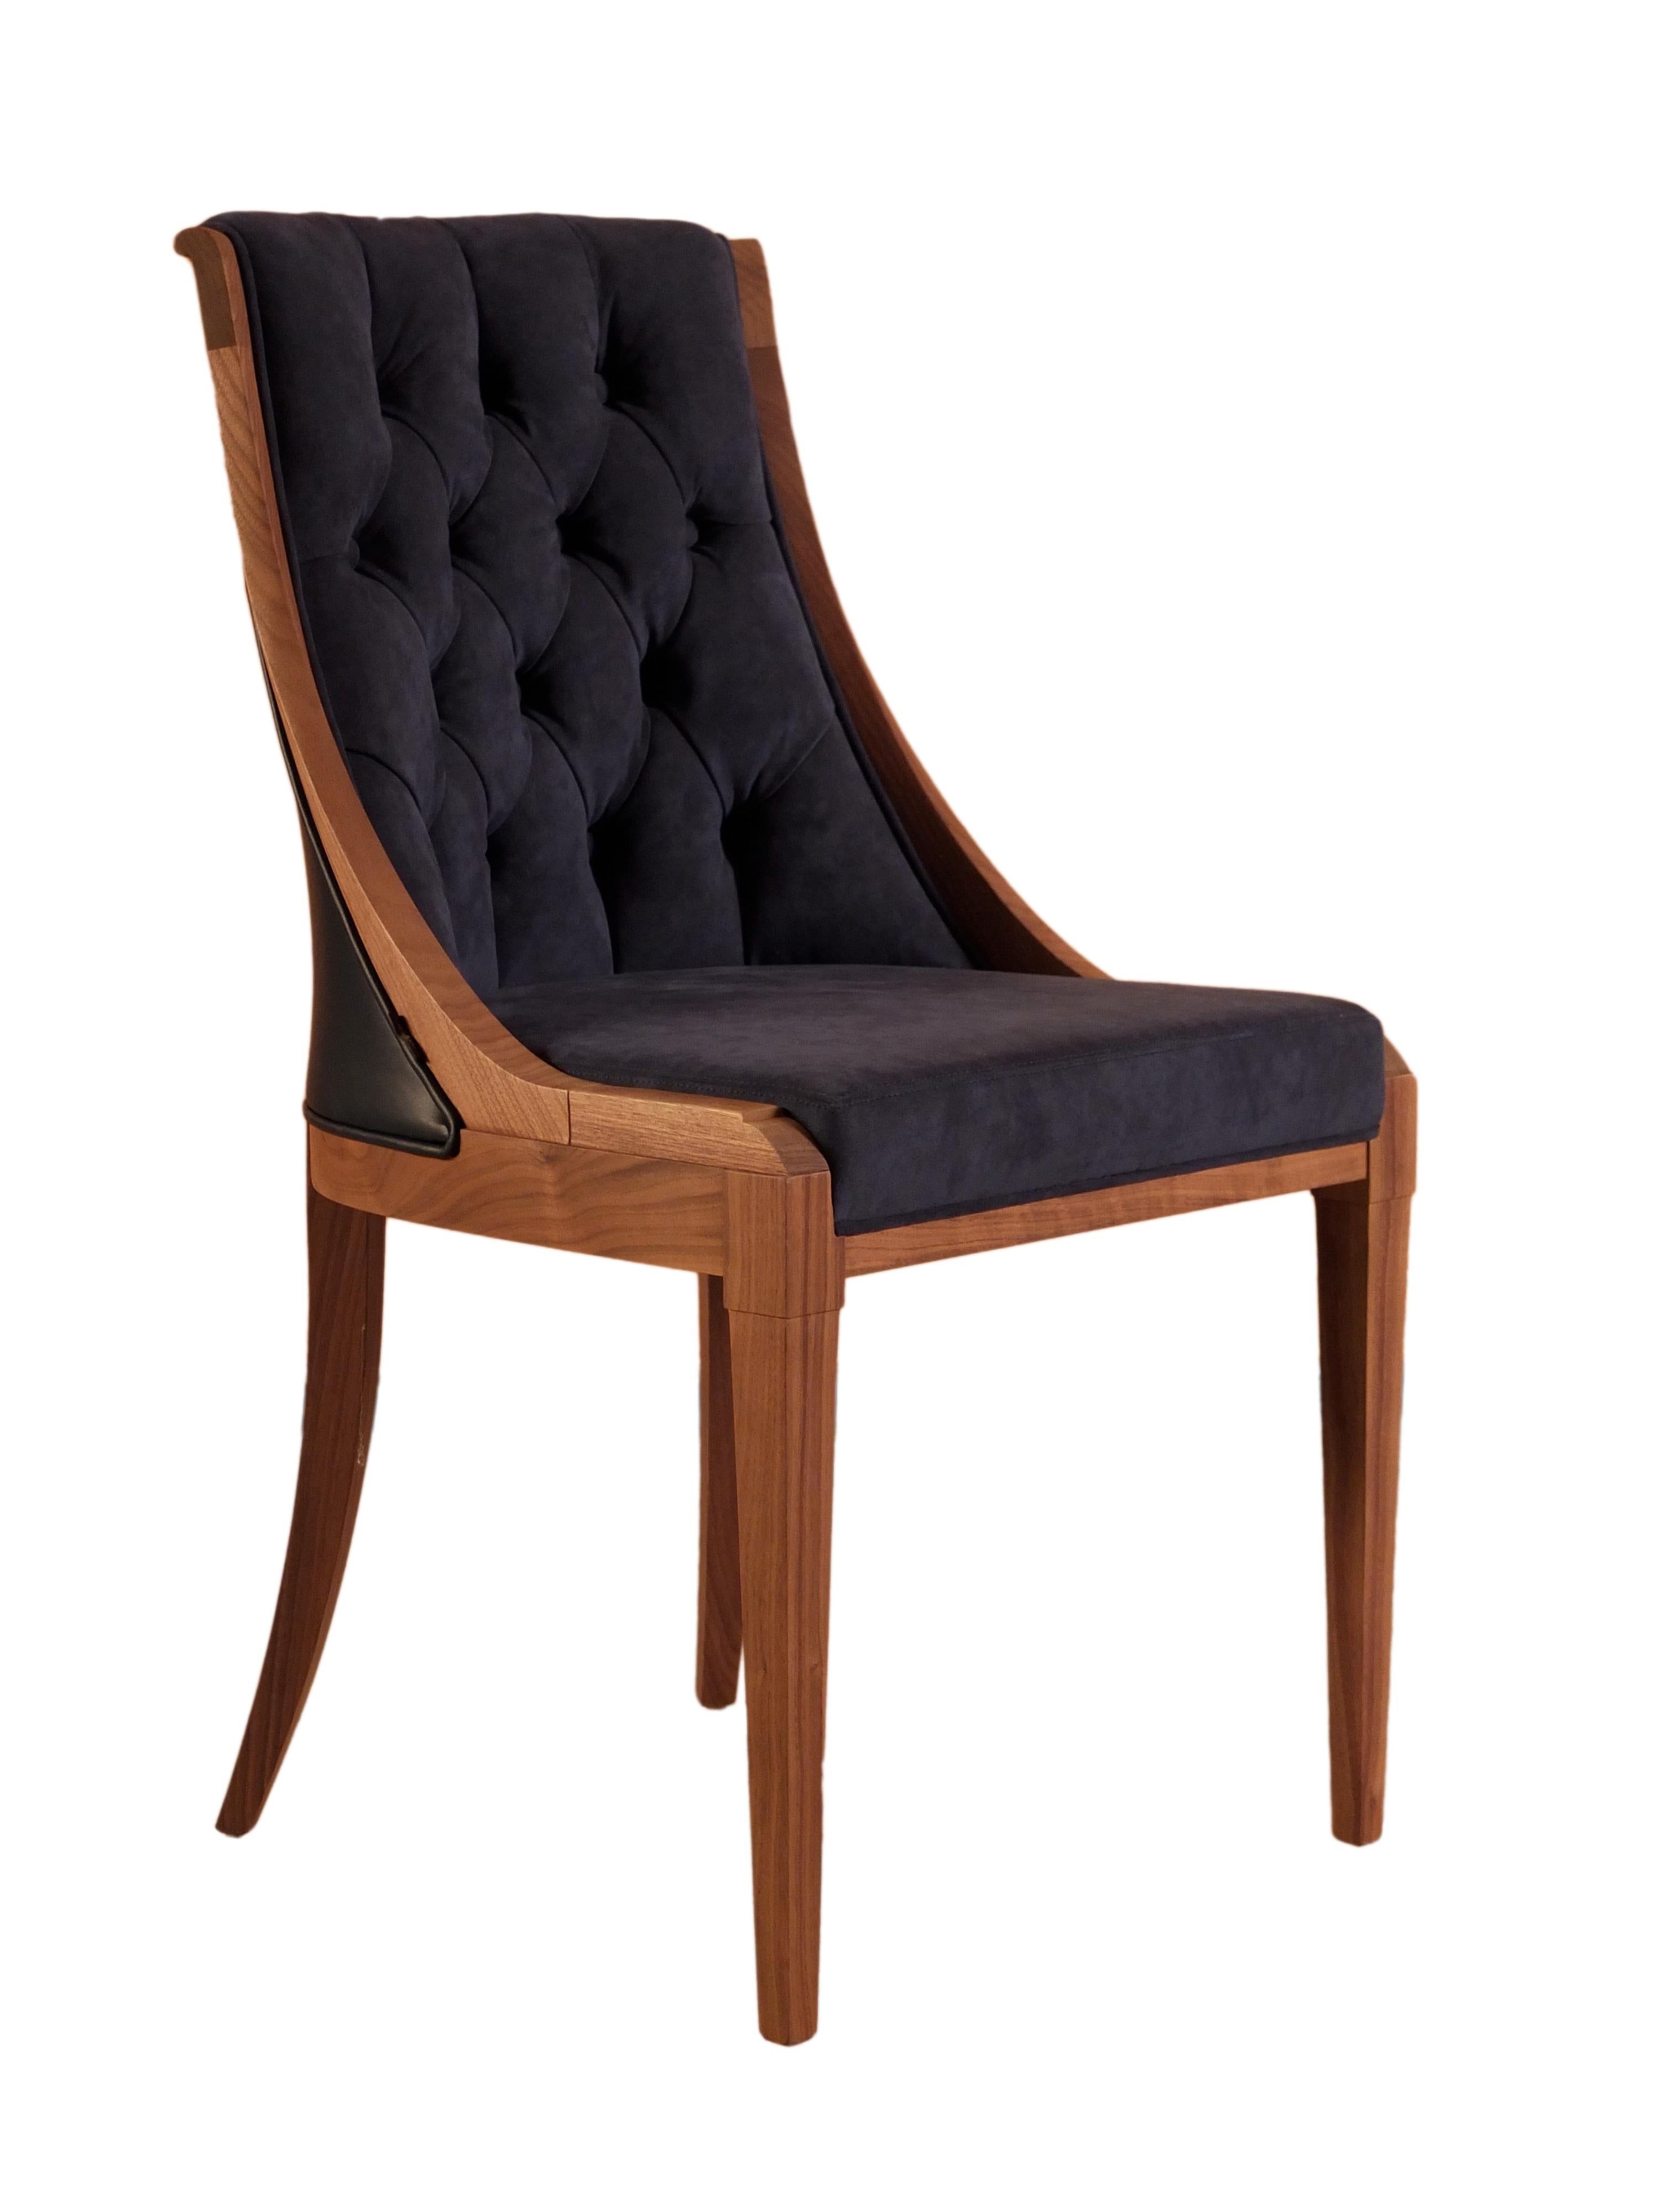 Musa is a Classic Biedermeier style chair made of solid cherrywood
Finely upholstered with COM, fabric or leather
The wood frame can be made of different color finishes.
      